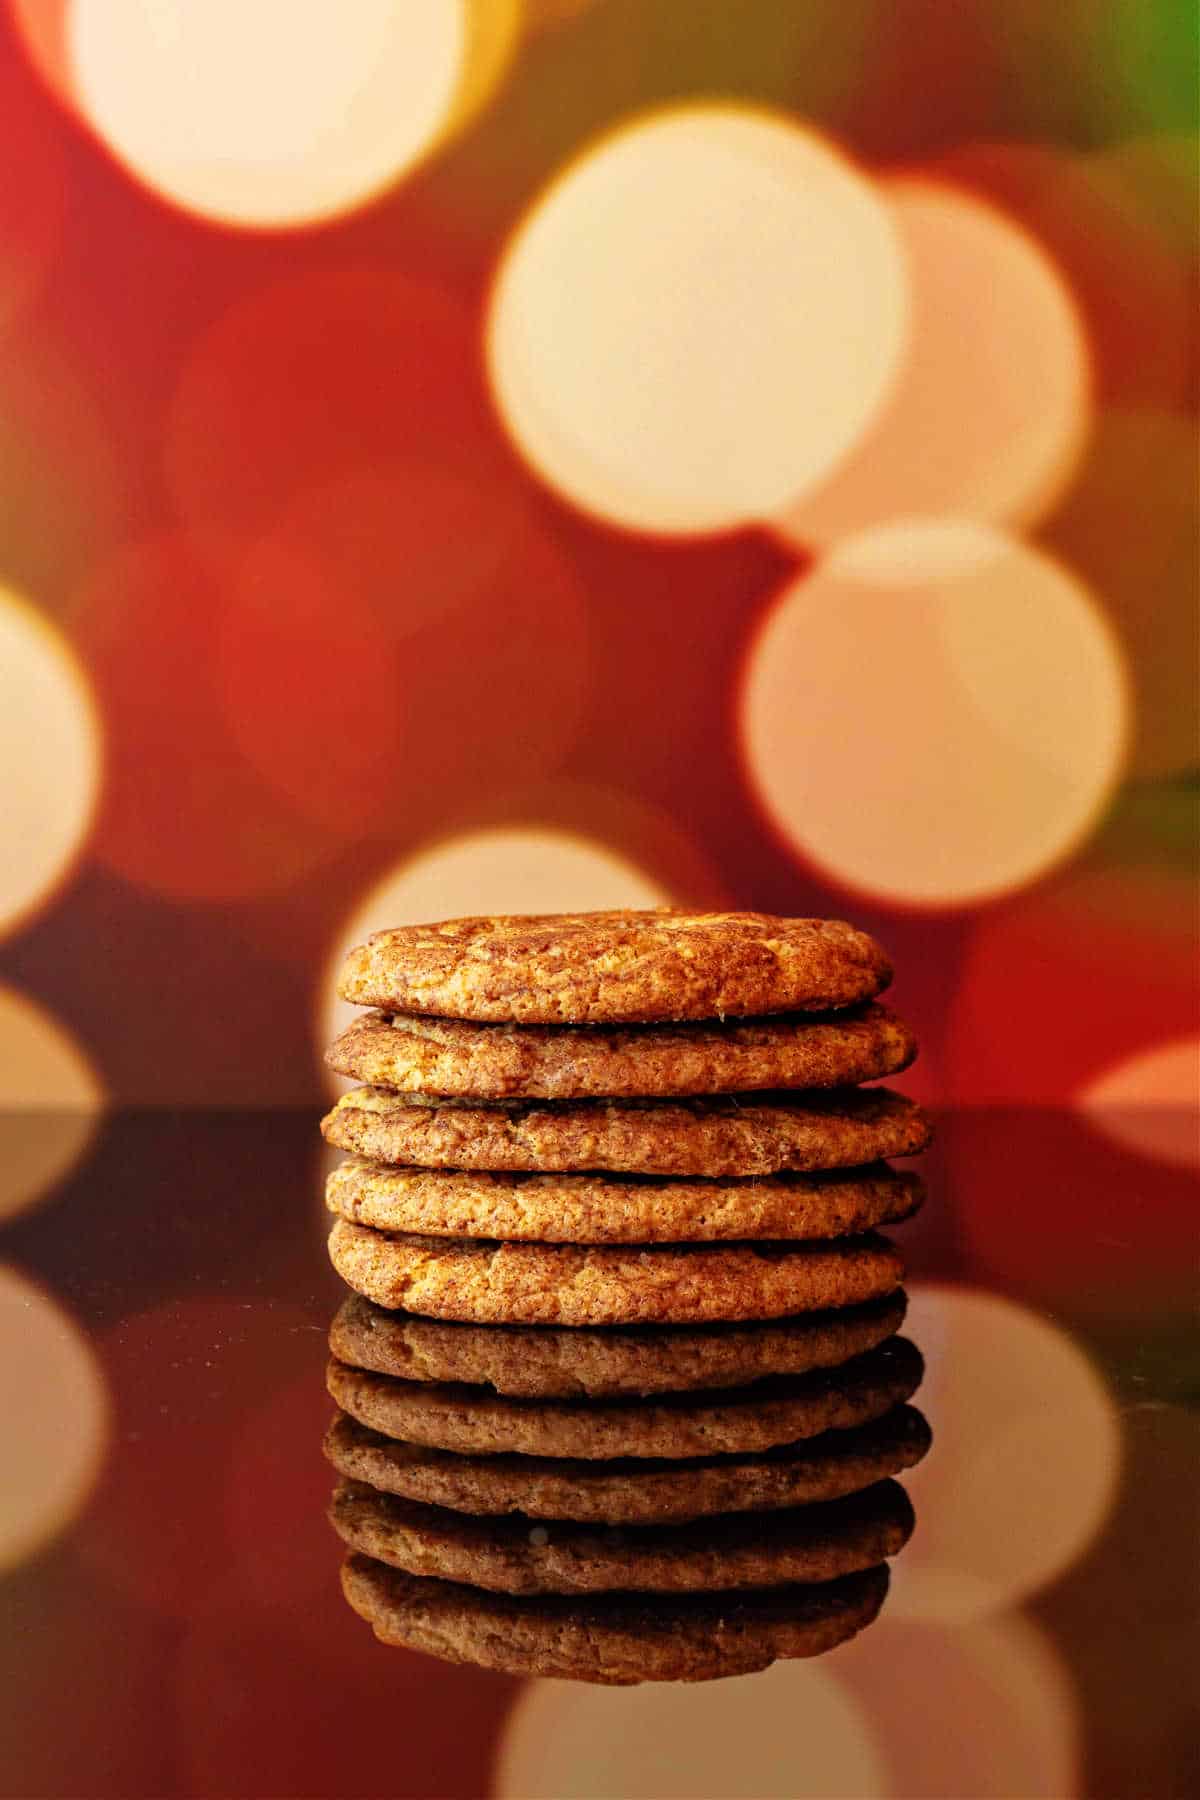 A stack of cookies shot on a dark, reflective surface with Christmas lights in the background and reflecting off the surface.